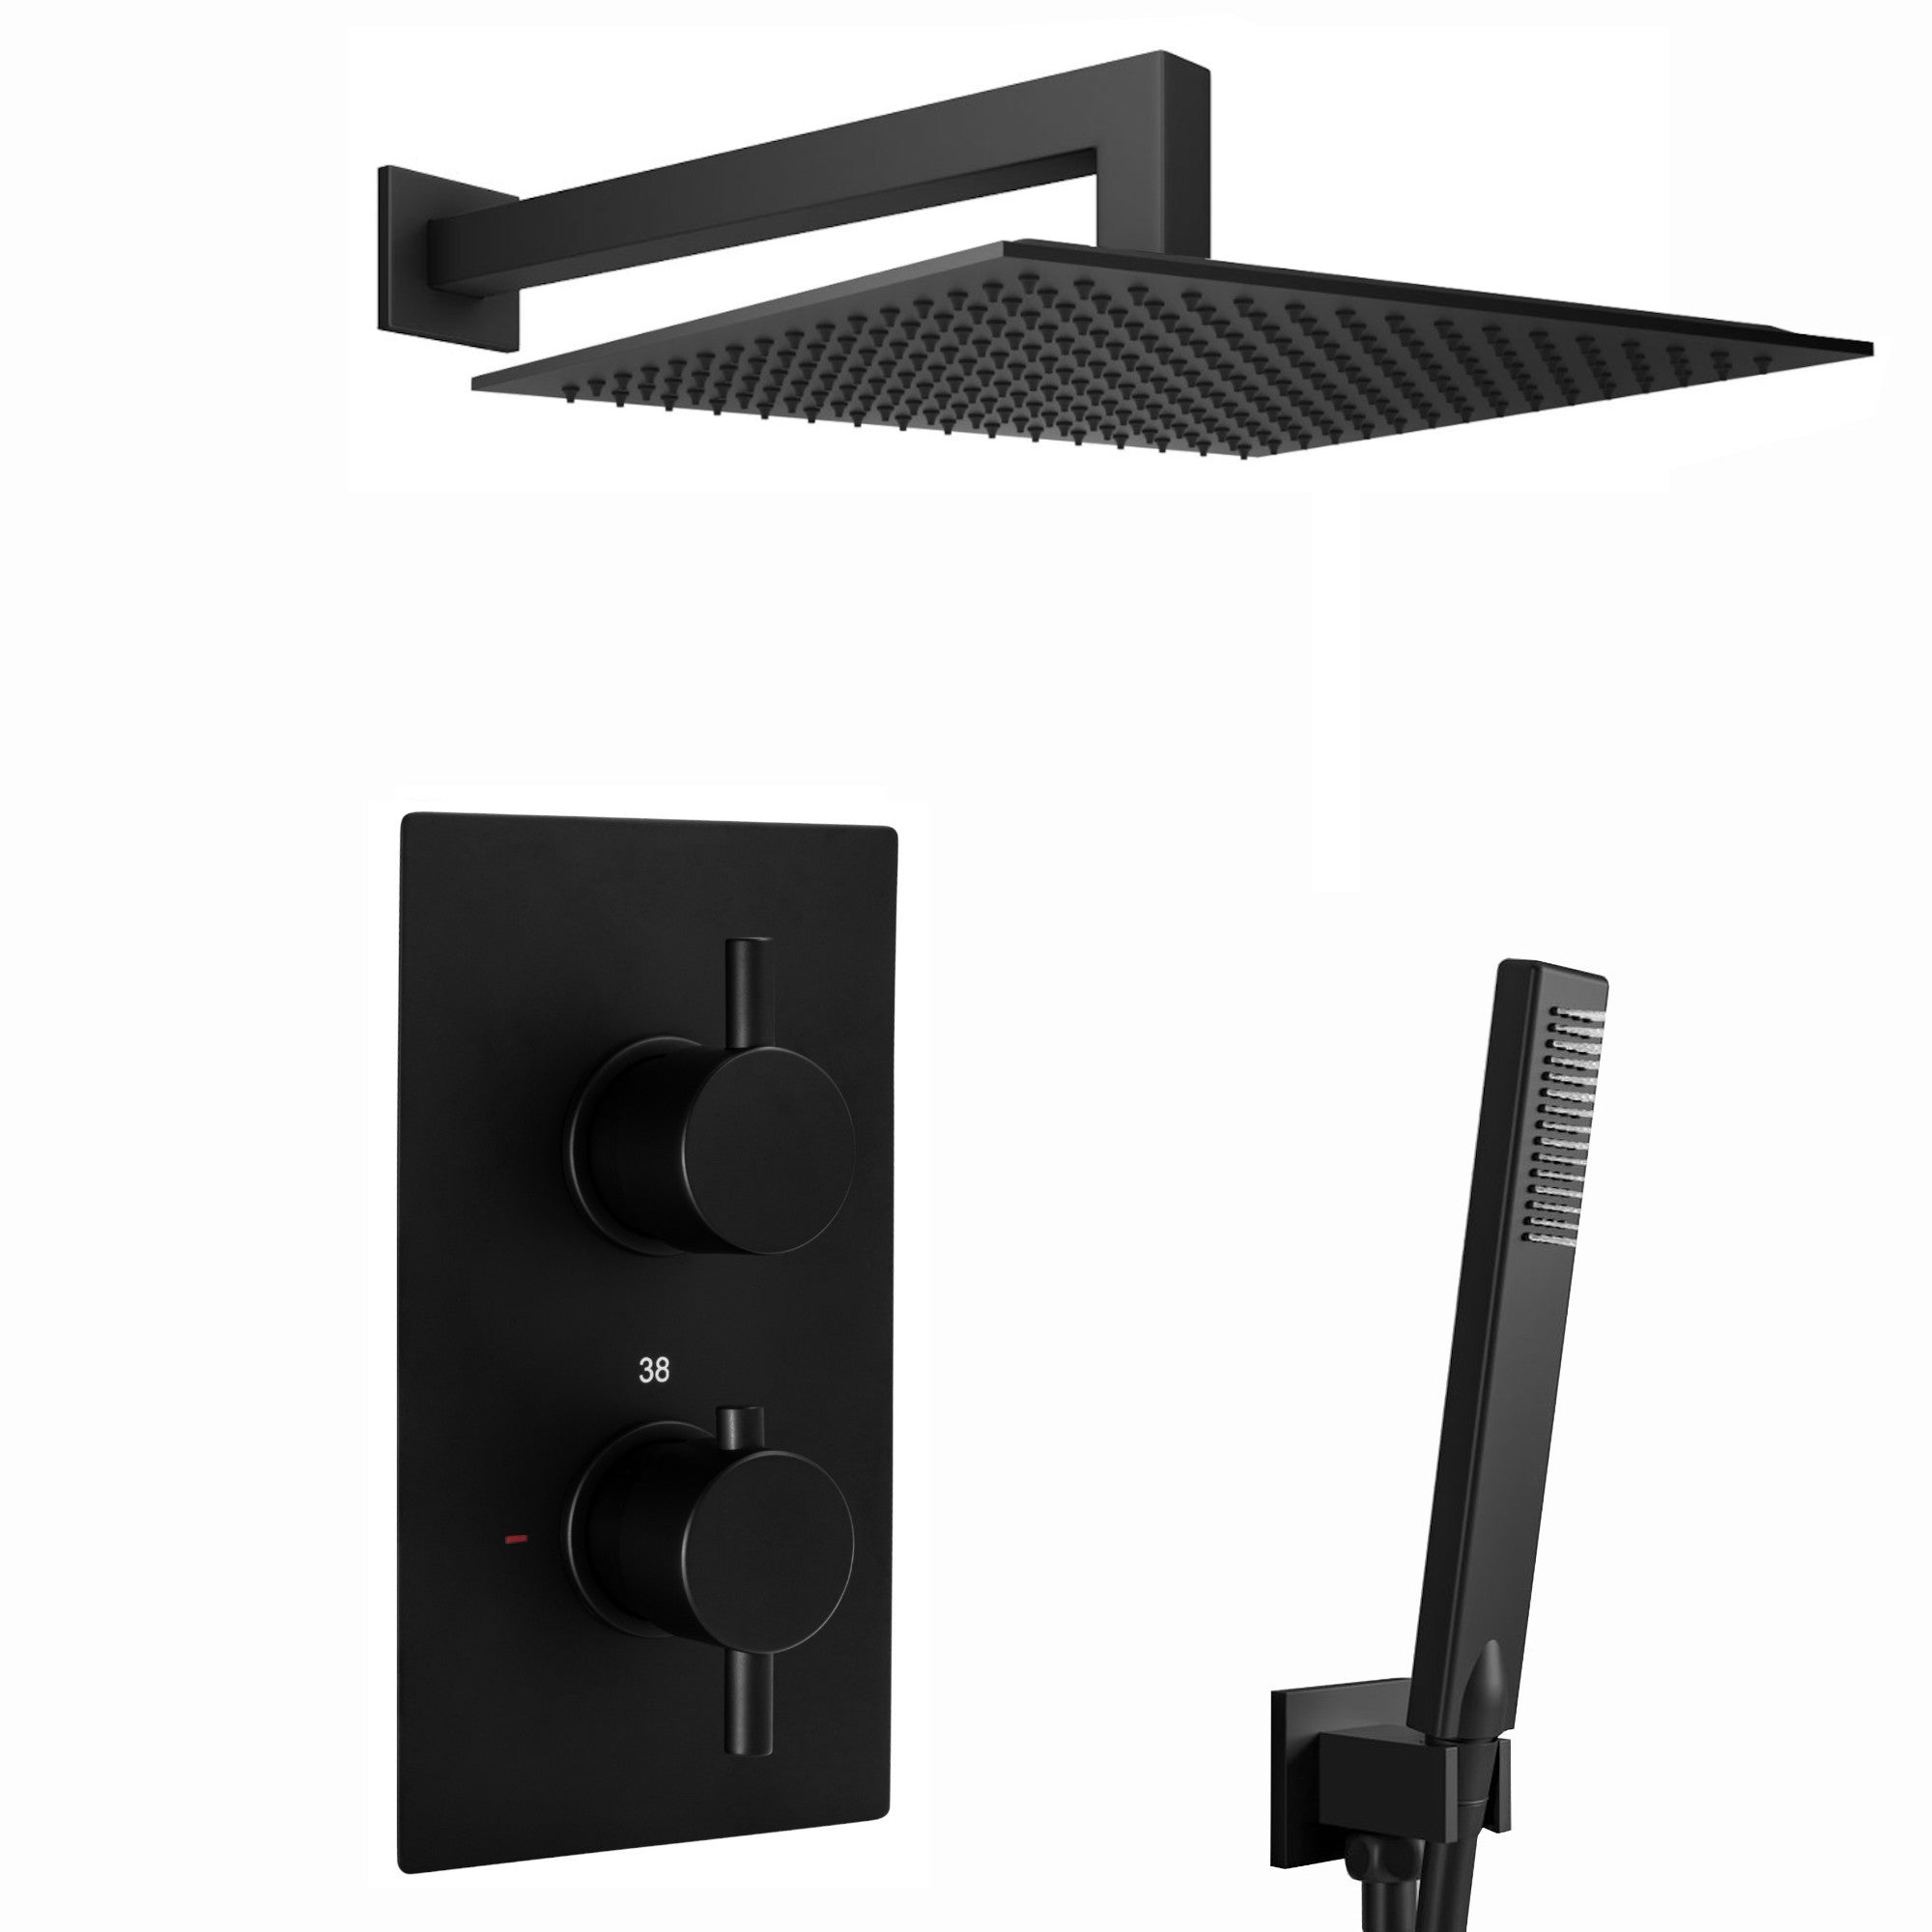 Venice Square Concealed Thermostatic Shower Set Incl. Twin Valve, Wall Fixed 8" Shower Head, Handset Kit - Matte Black (2 Outlet)